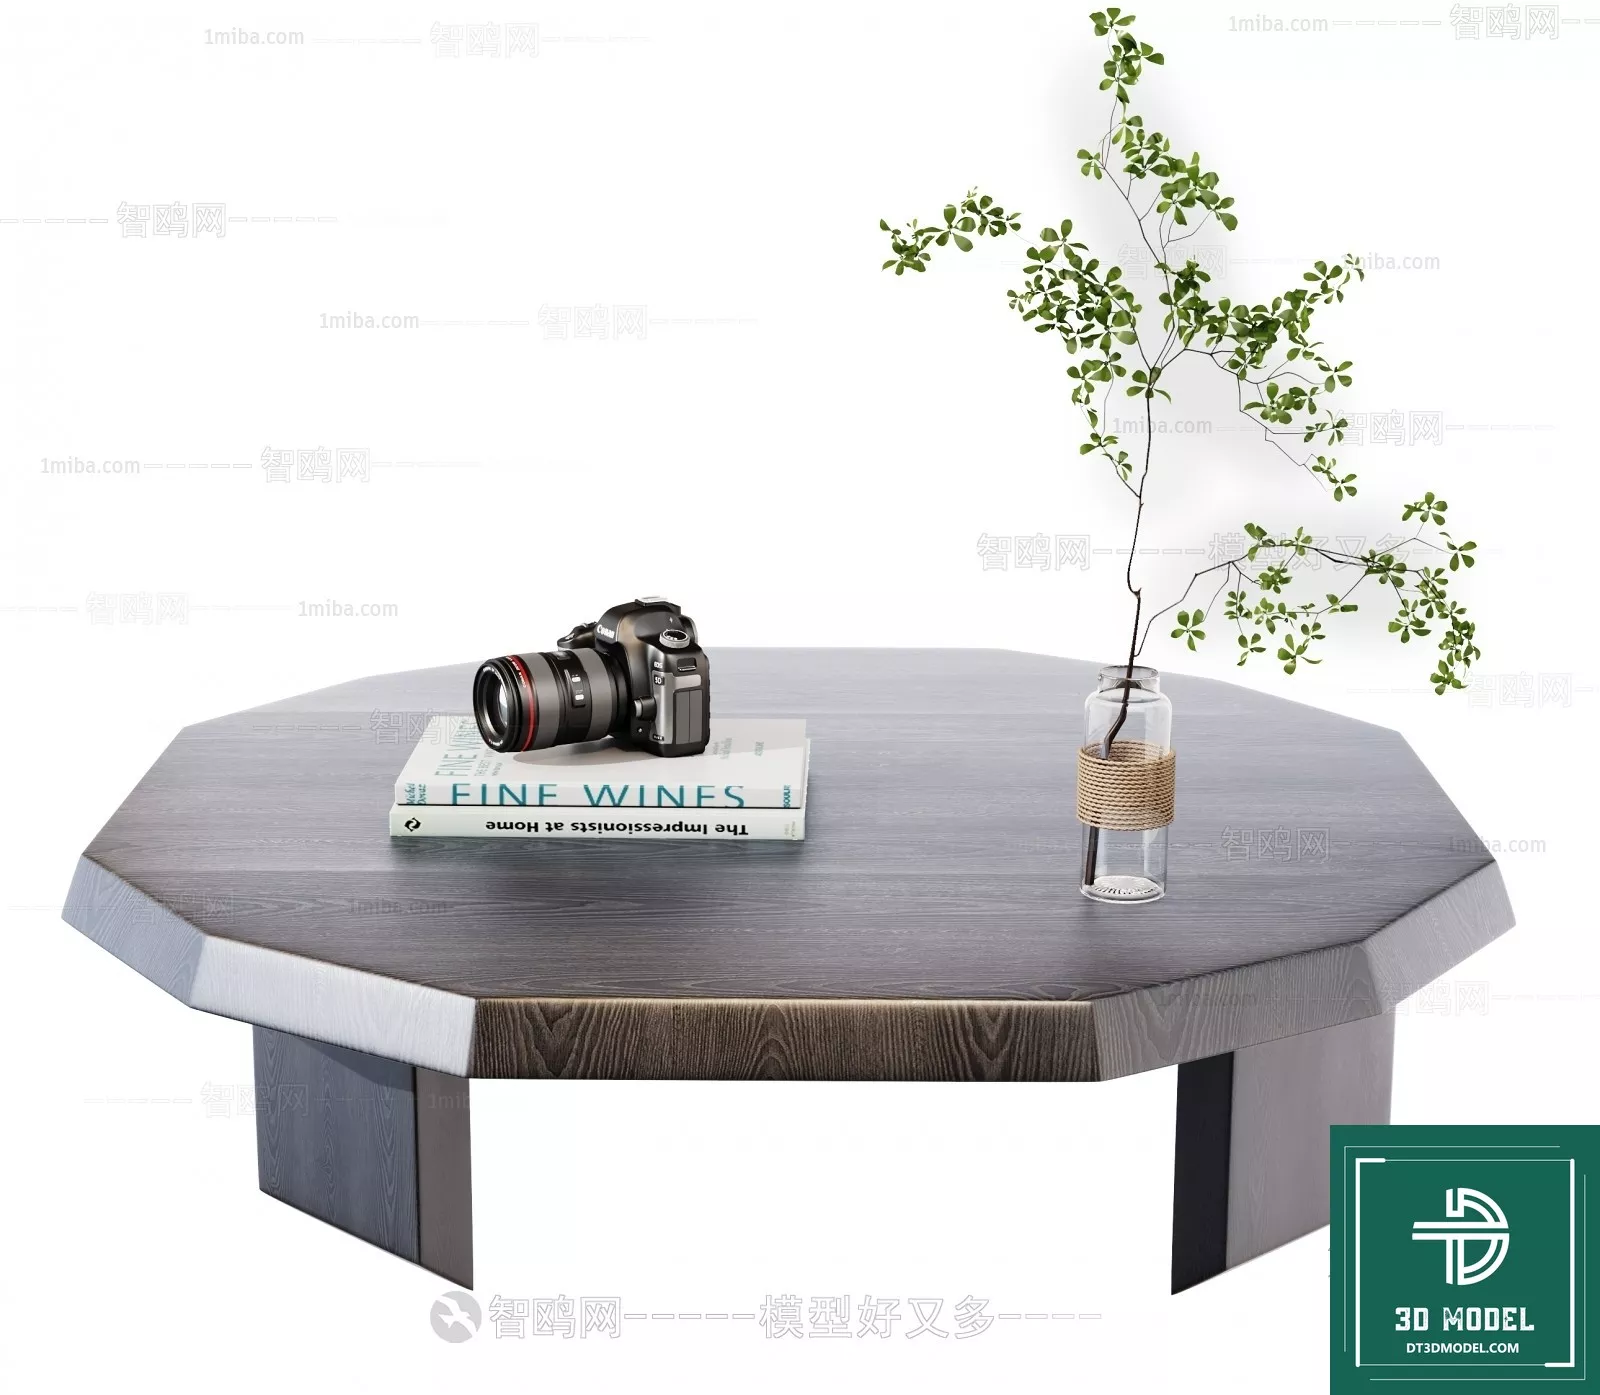 MODERN TEA TABLE - SKETCHUP 3D MODEL - VRAY OR ENSCAPE - ID14996